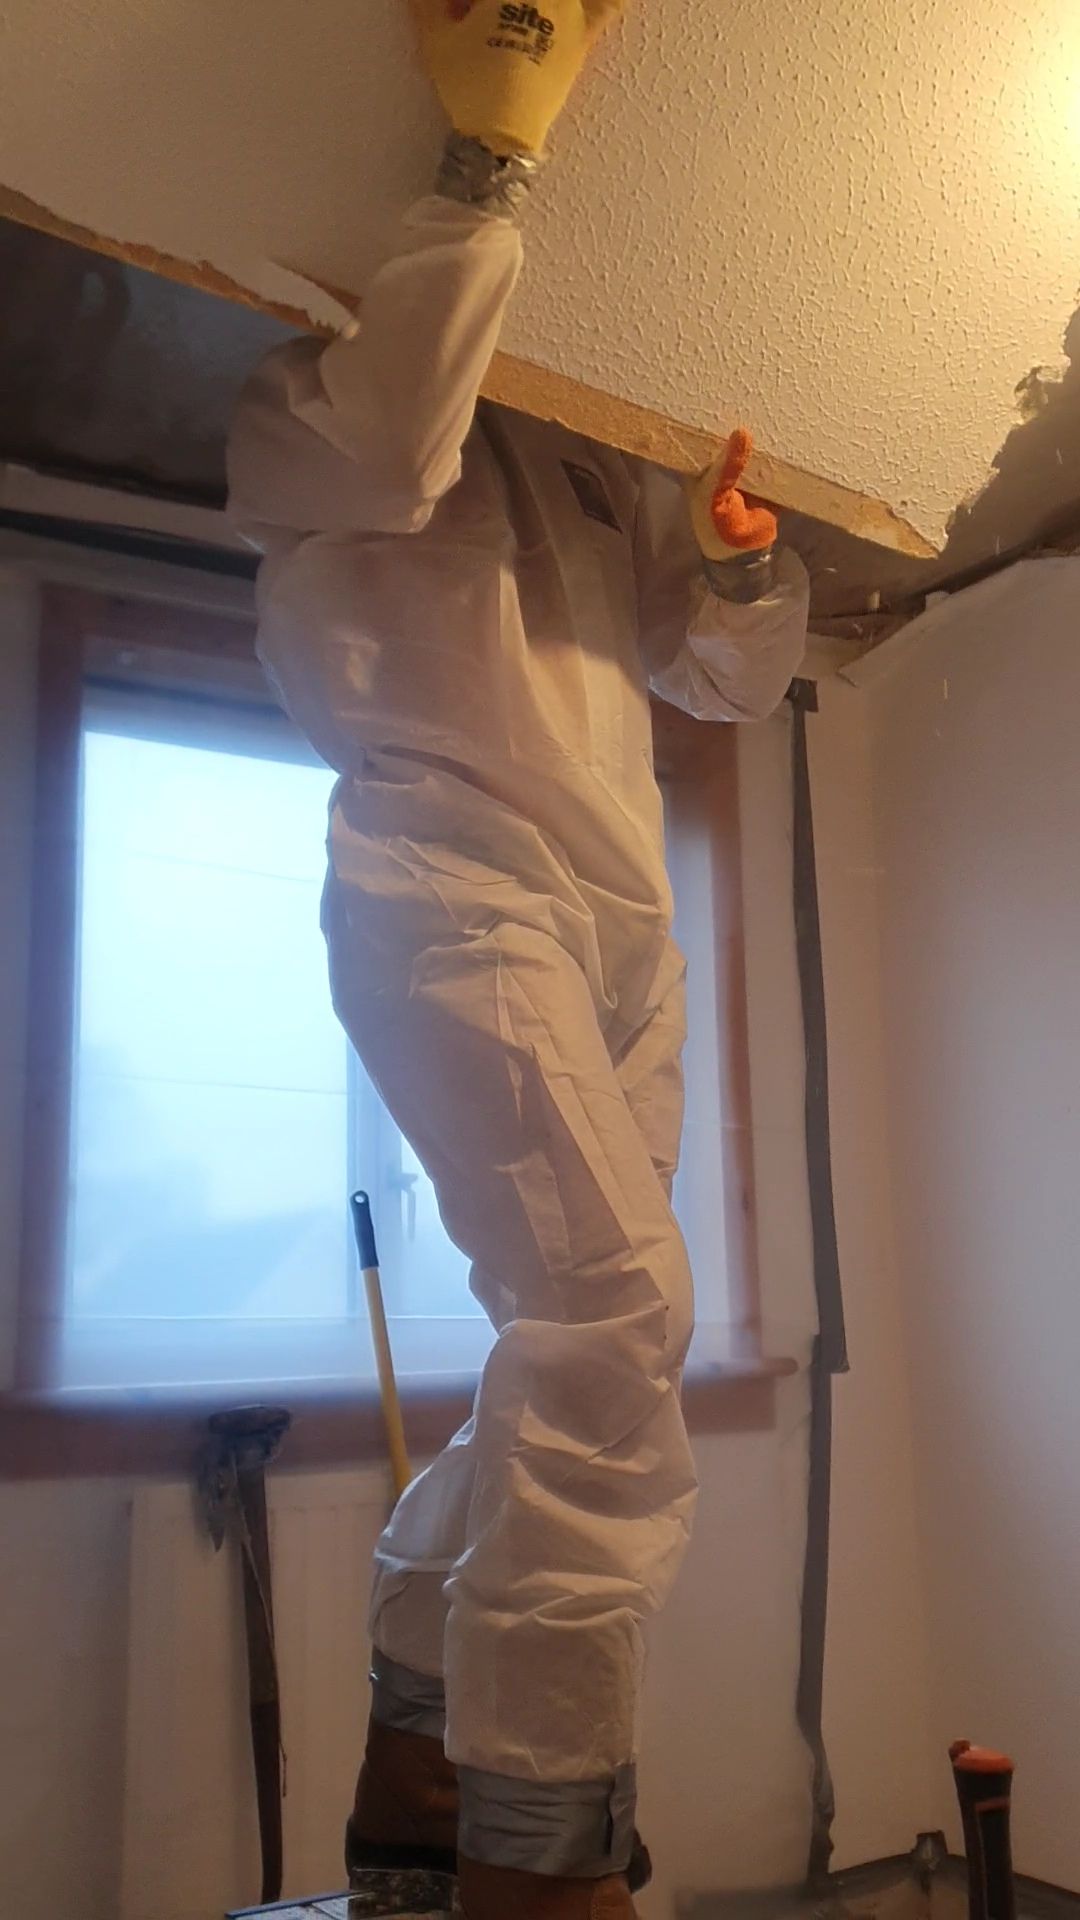 a person in a white suit is spraying a ceiling with a spray bottle .